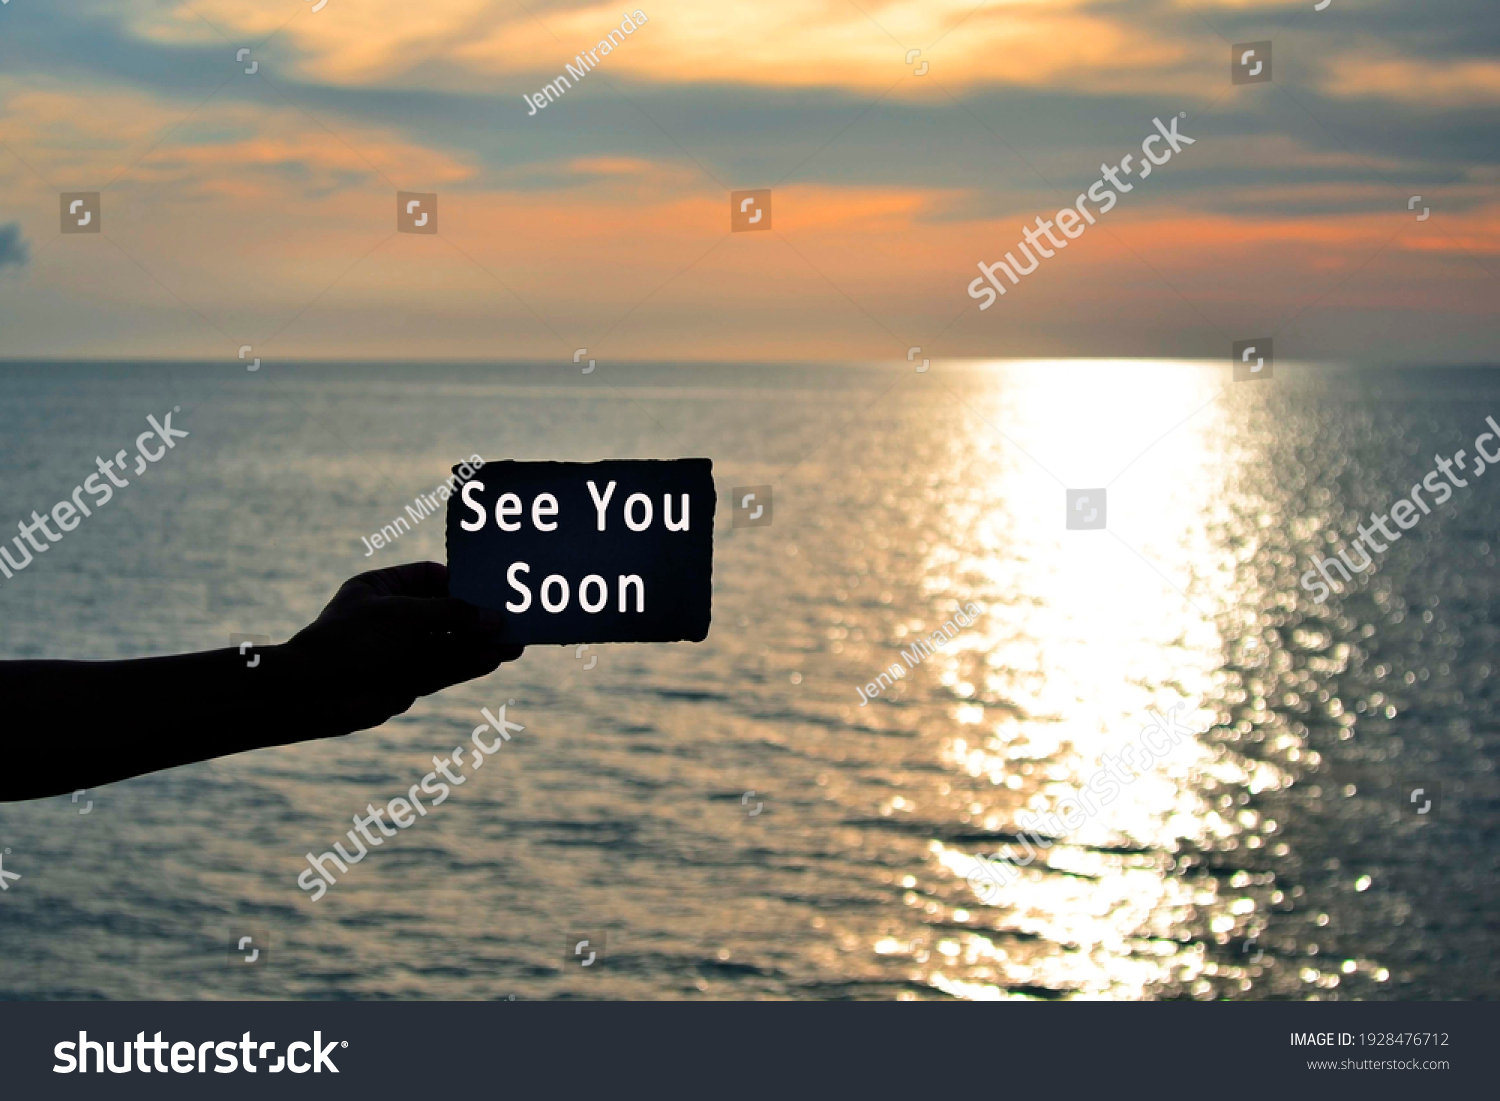 See you soon text on hand holding torn paper with blurred background of sunset at the beach of Tanjung Aru Beach, Kota Kinabalu, Borneo,Sabah, Malaysia #1928476712